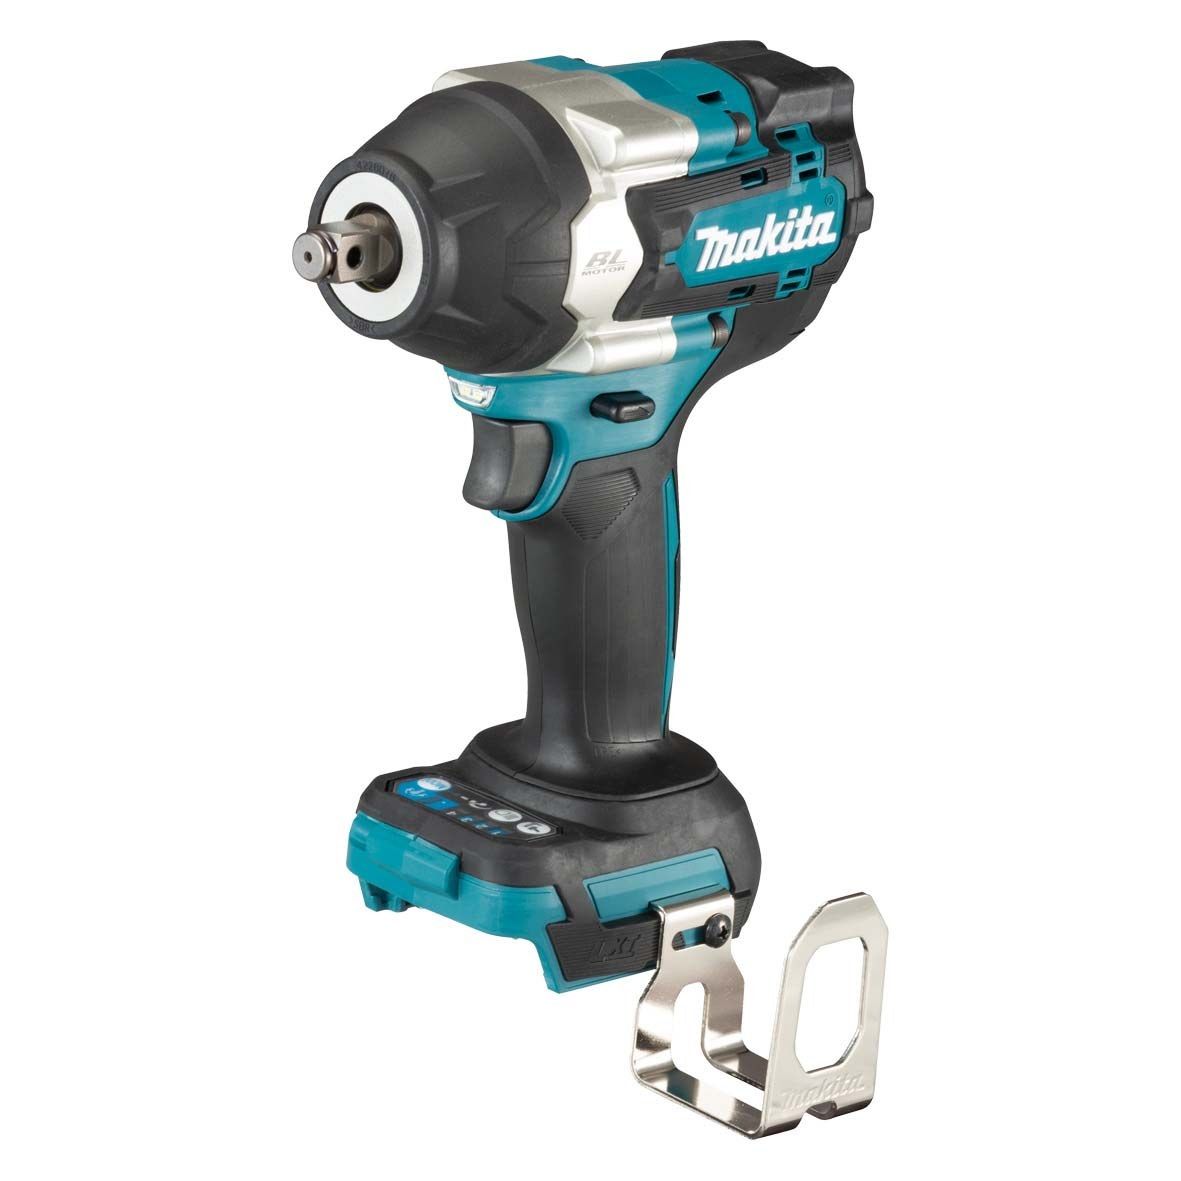 Makita DTW190Z 18V LXT Li-ion 1/2 Square Impact Wrench with 2 x 5.0Ah BL1850 Batteries 